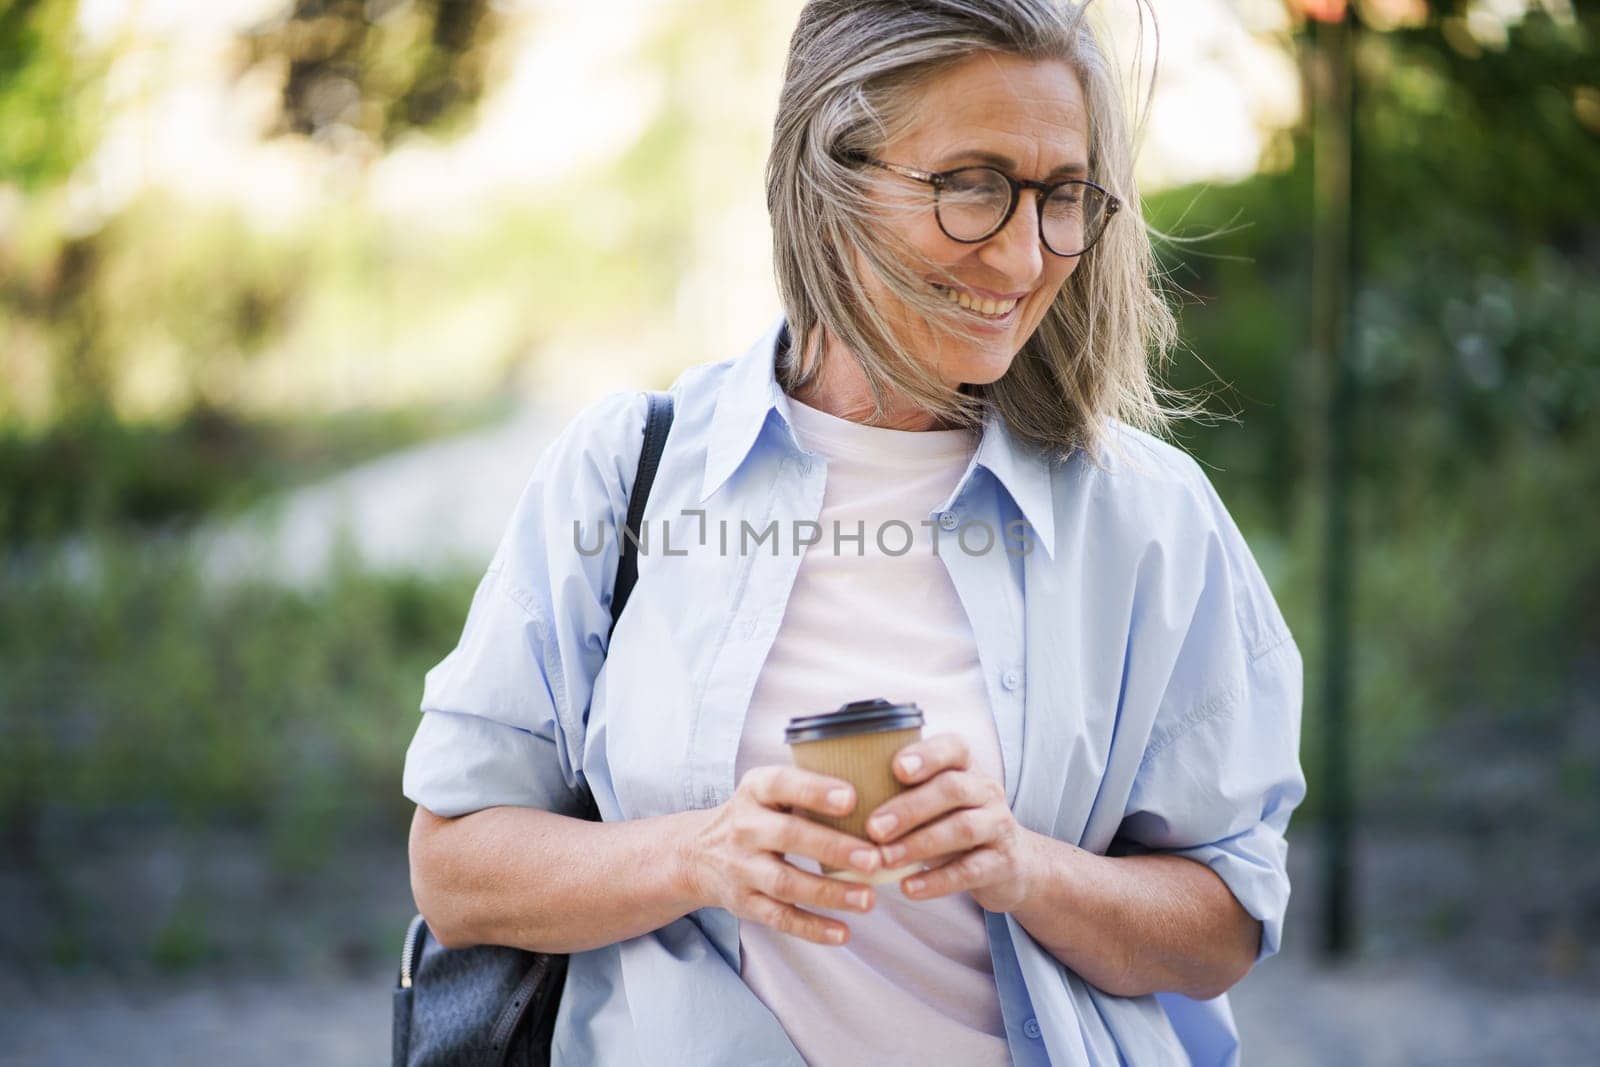 A woman wearing glasses is focused on her cup of coffee, absorbed in what she is drinking.